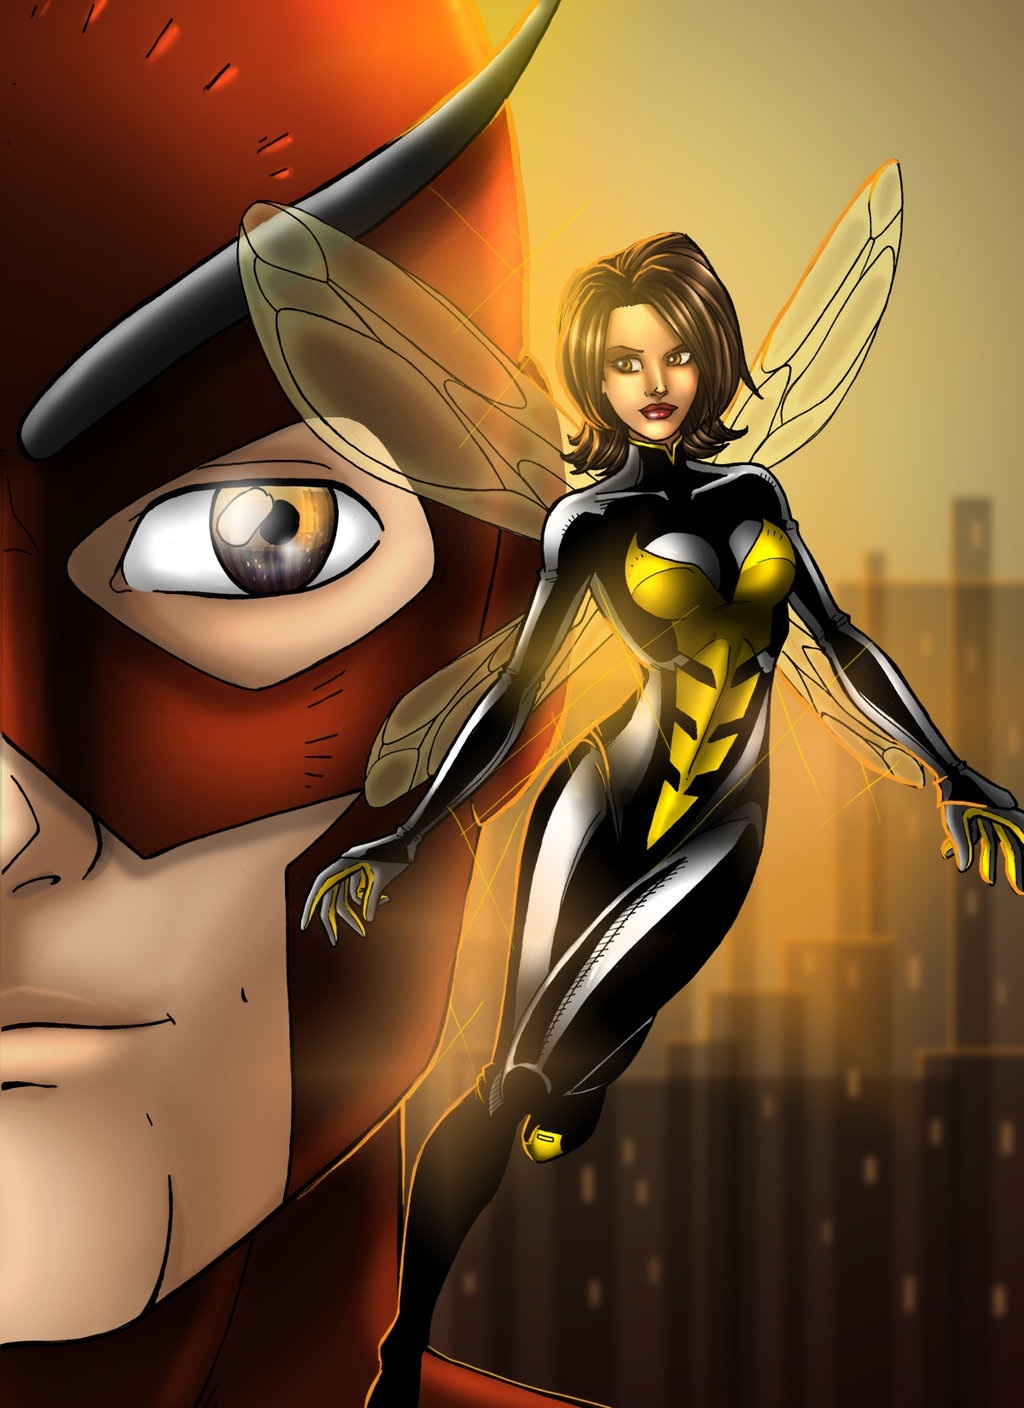 Well, Wasp was also supposed to appear in Captain America: Civil War.